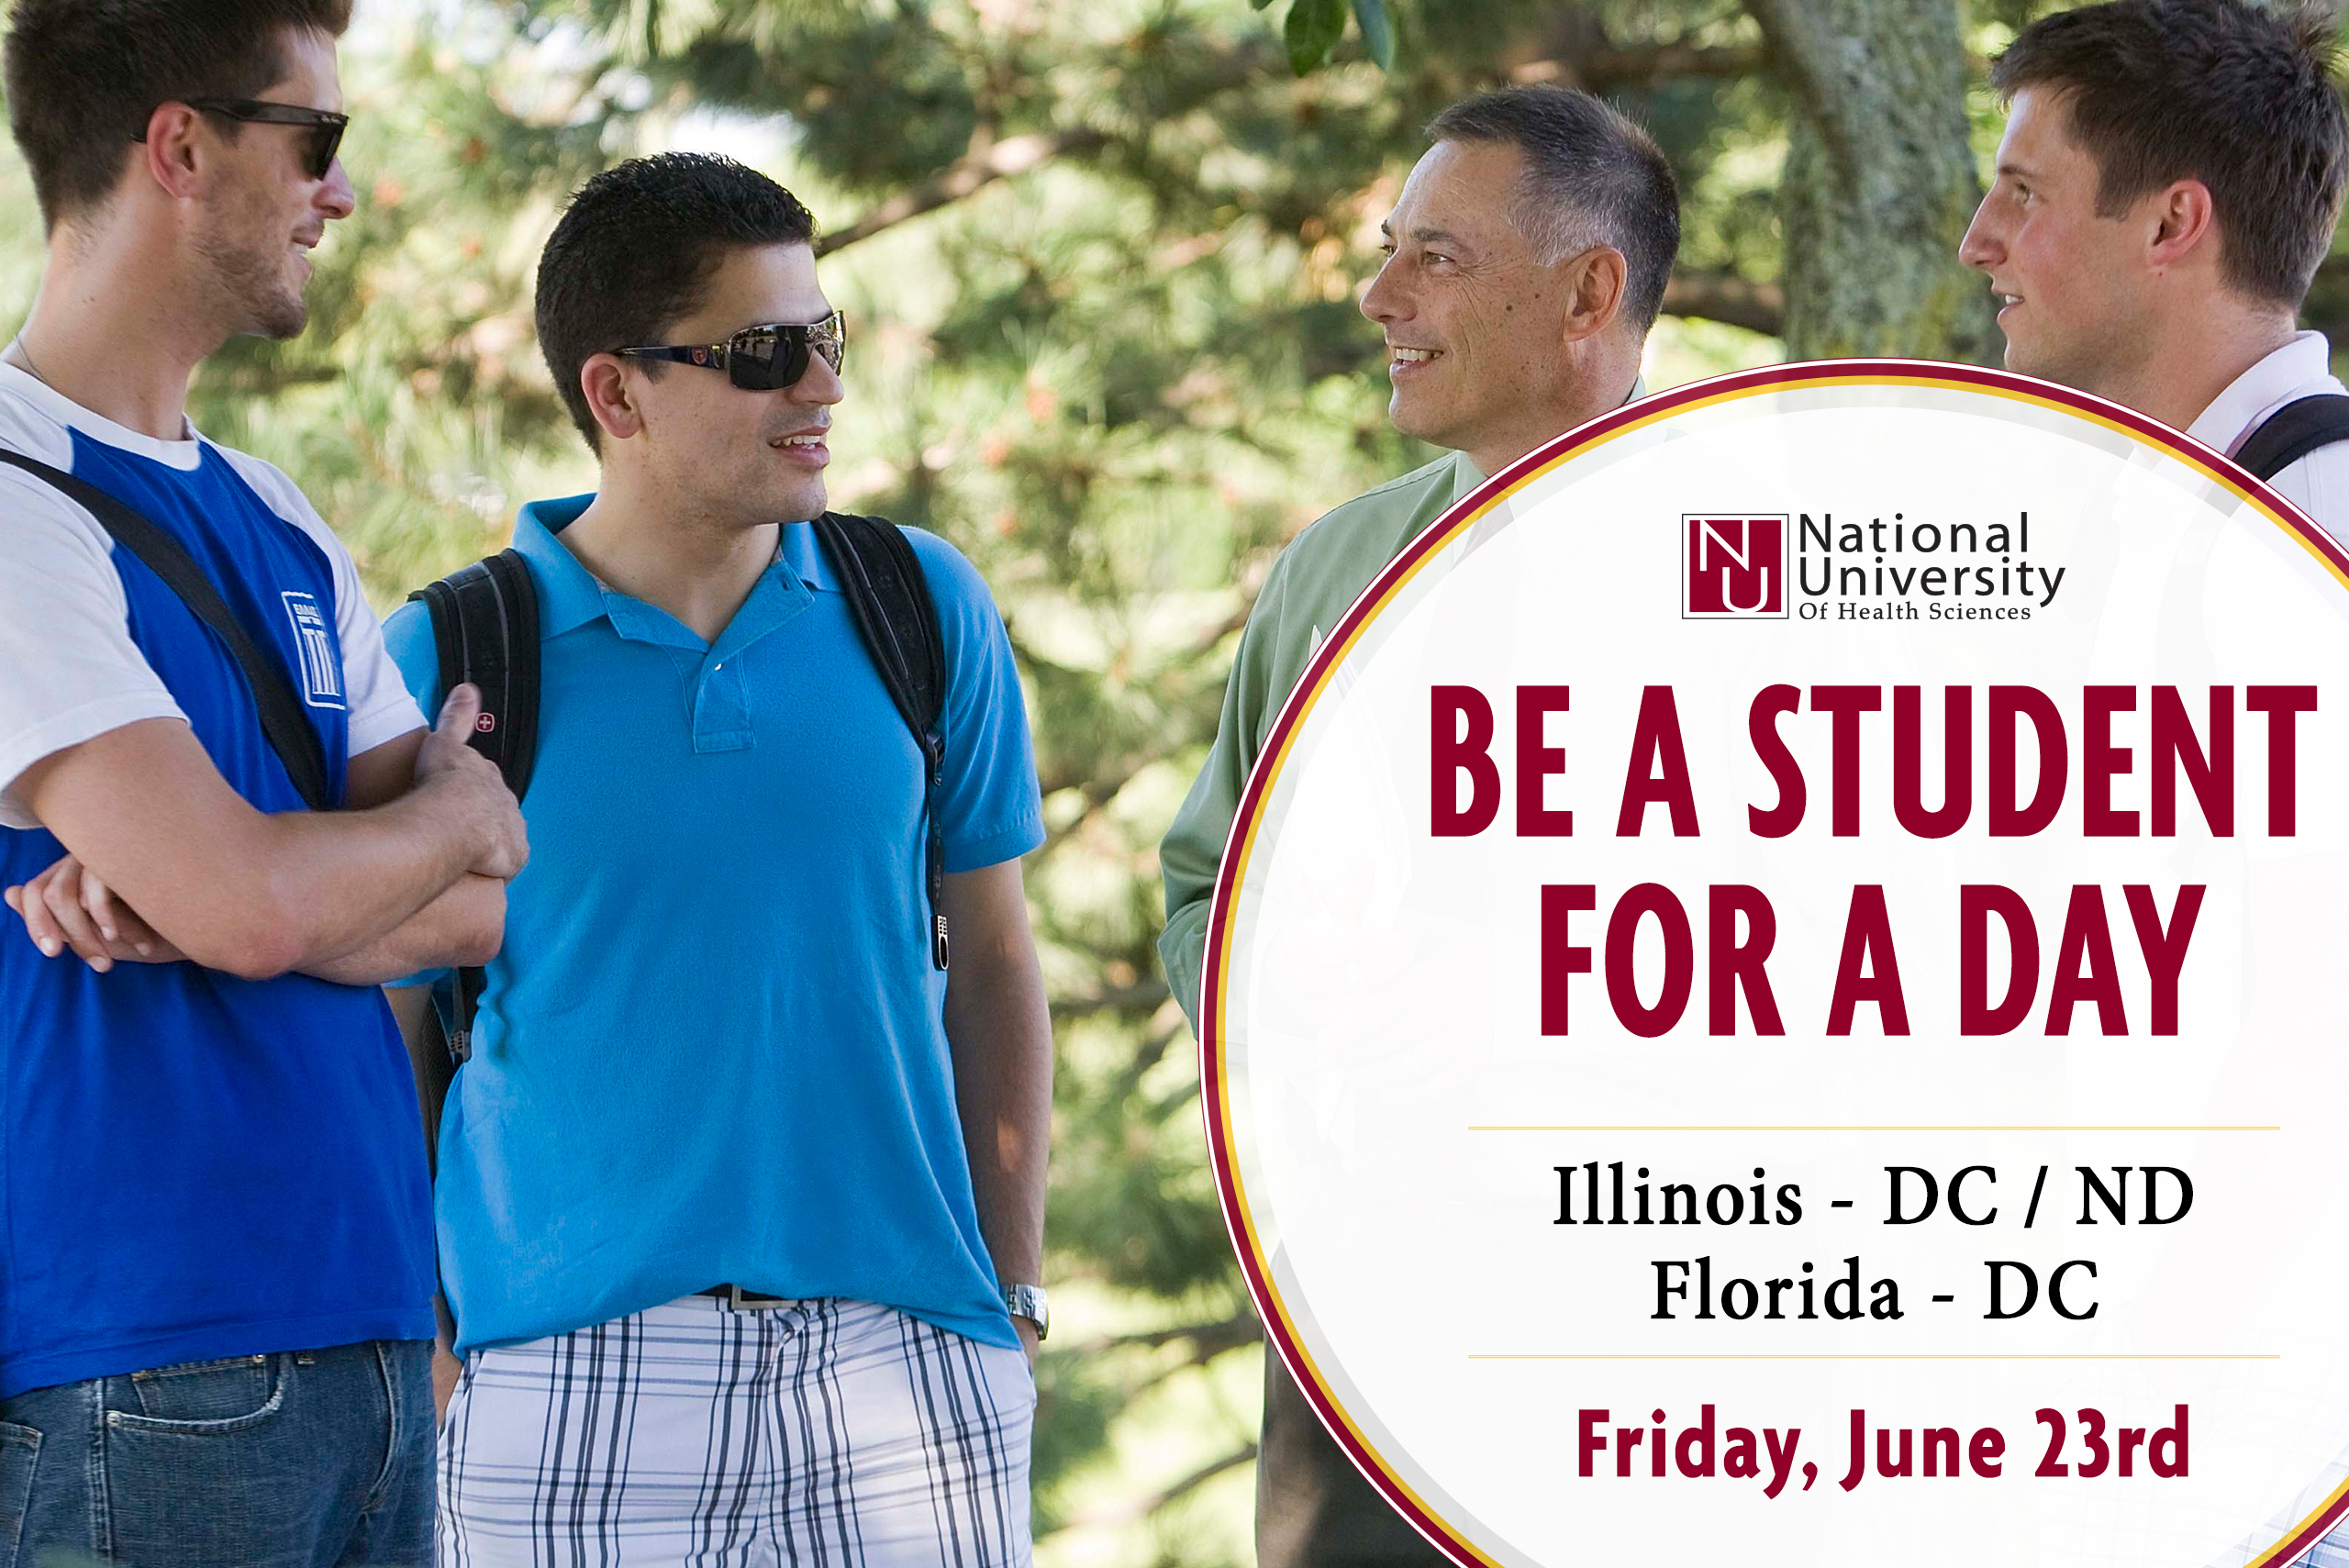 Be a Student for a Day Friday June 23rd